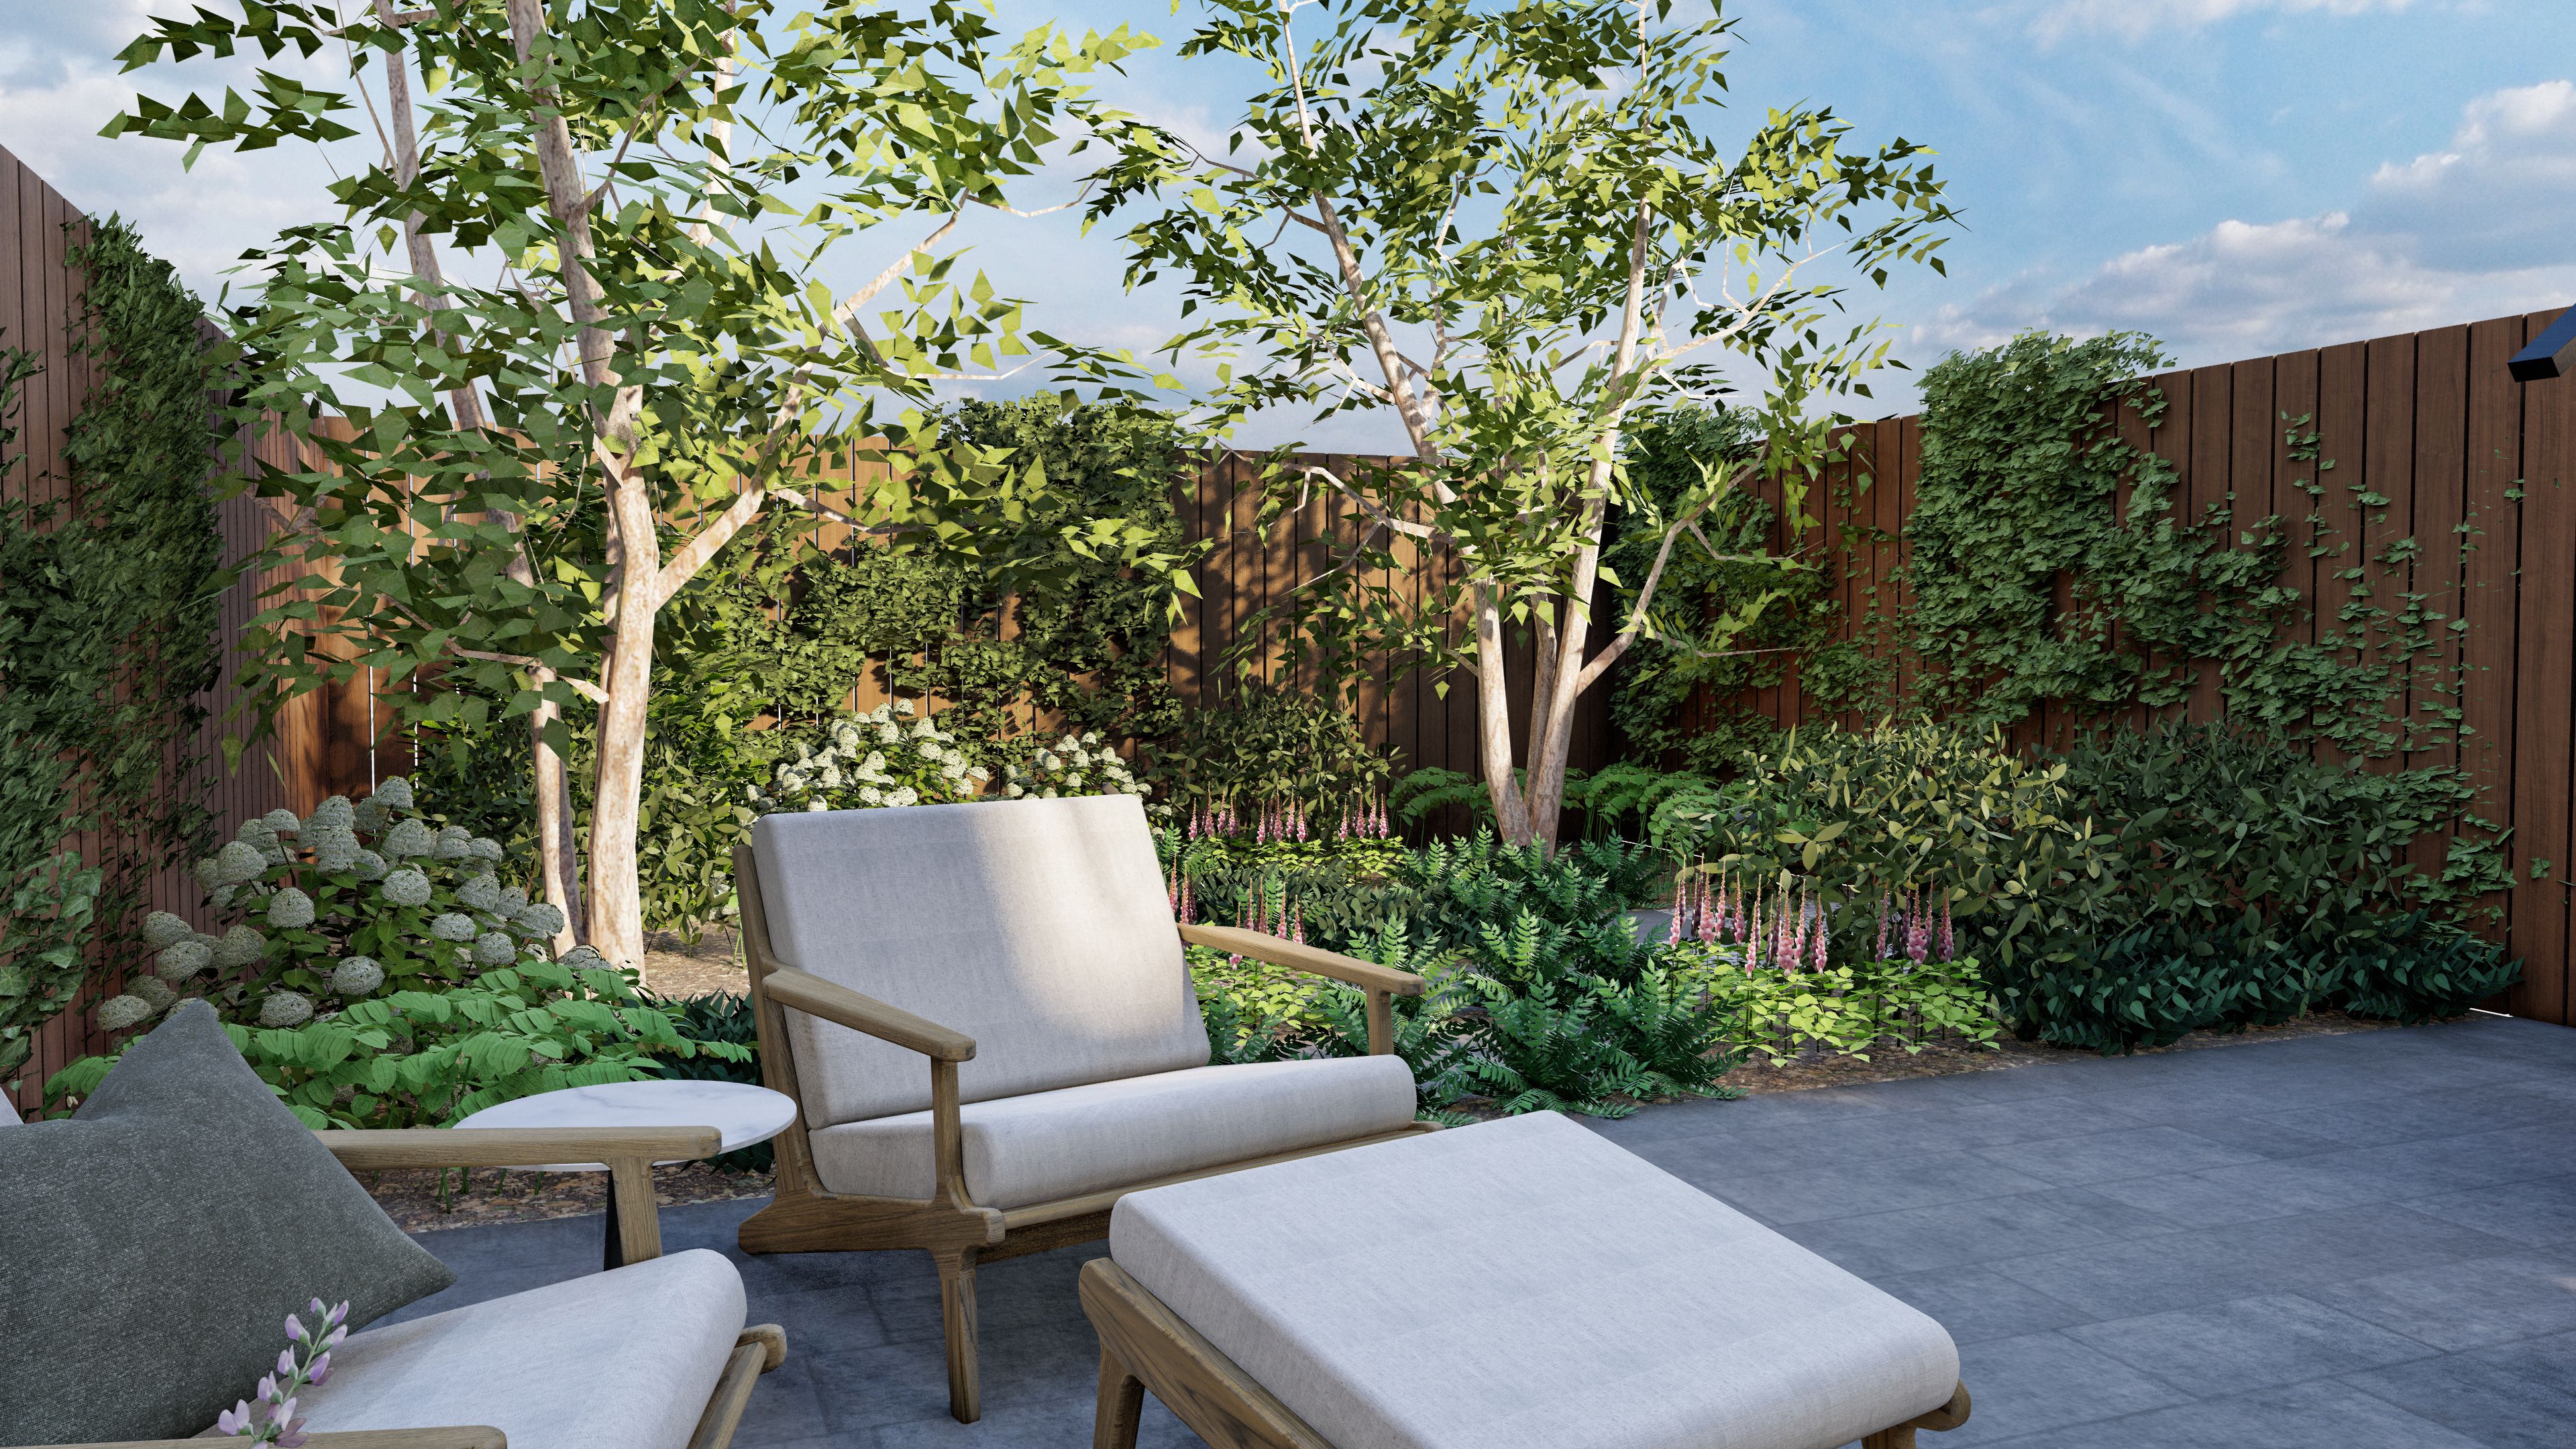 small backyard landscaping ideas in New York City with lots of greenery